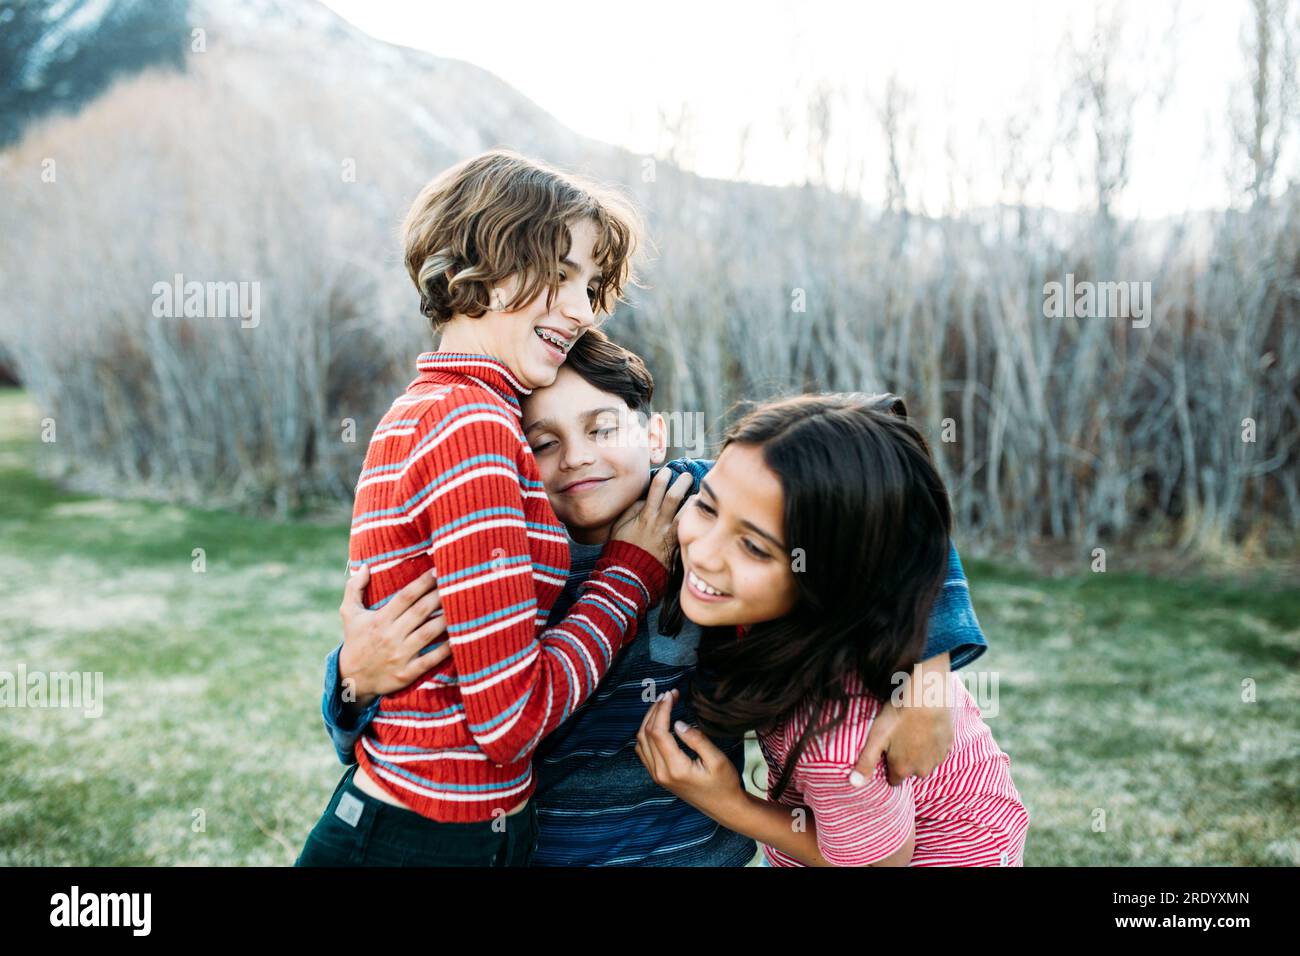 Little brother hugging two sisters one wants to get away Stock Photo